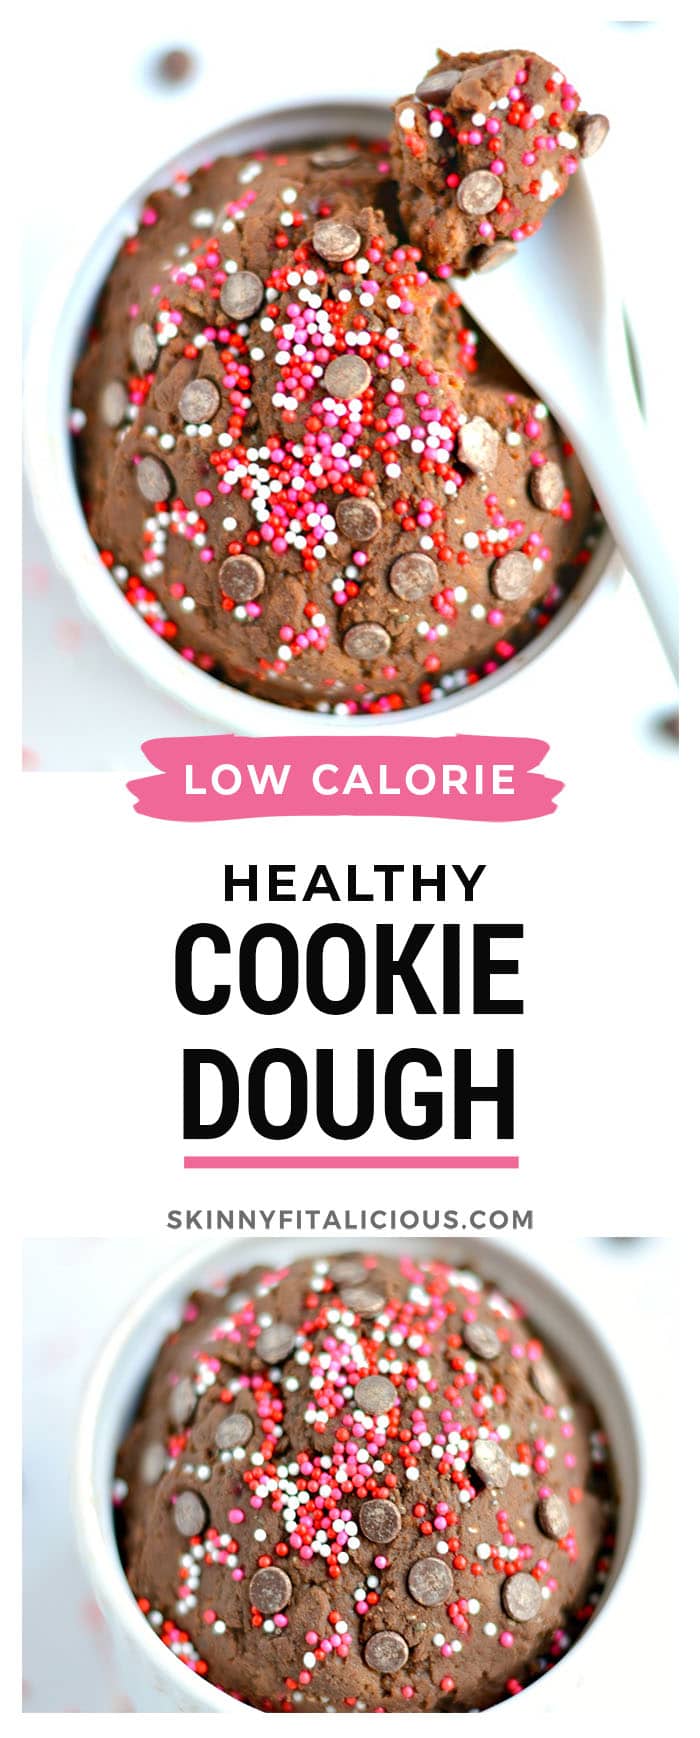 Chocolate Protein Cookie Dough made with 3 simple & healthy ingredients. A quick no-bake snack that's Vegan, Paleo, gluten free, dairy-free and crazy delicious! Gluten Free + Paleo + Vegan